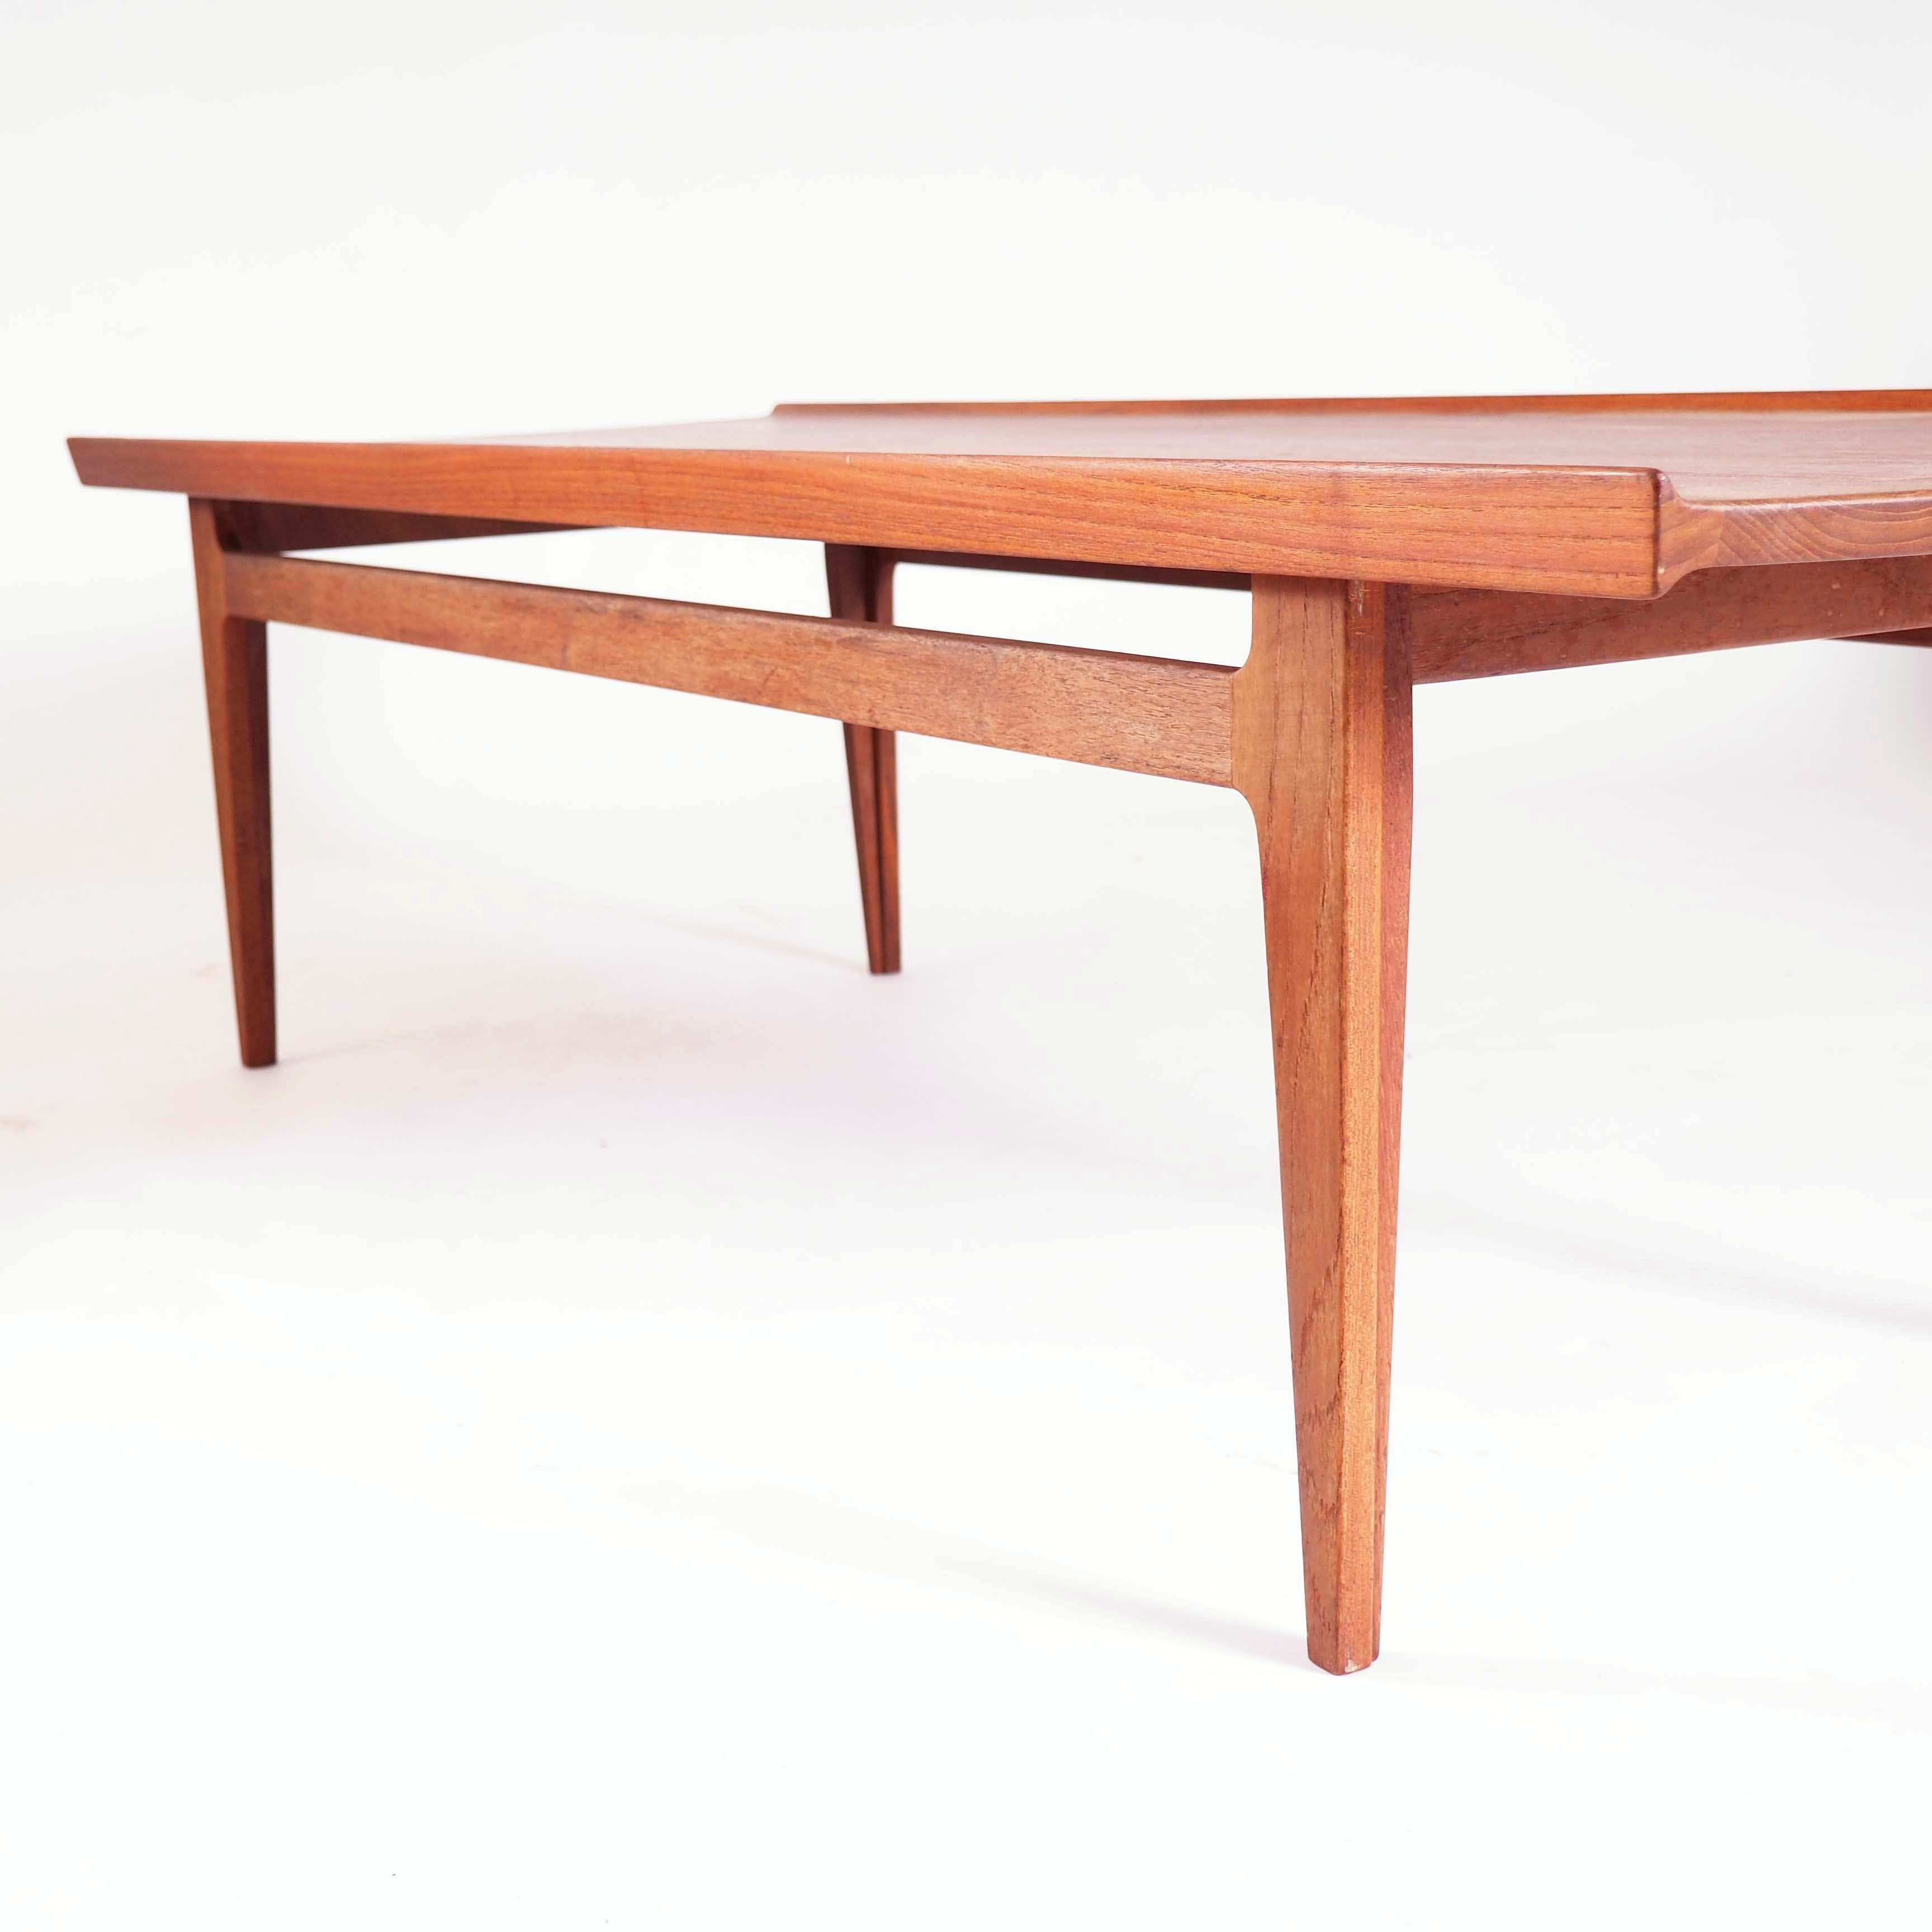 This coffee table was designed by the Danish designer Finn Juhl during the 1950s and made by France & Son. The table is in solid teak and of very high quality.